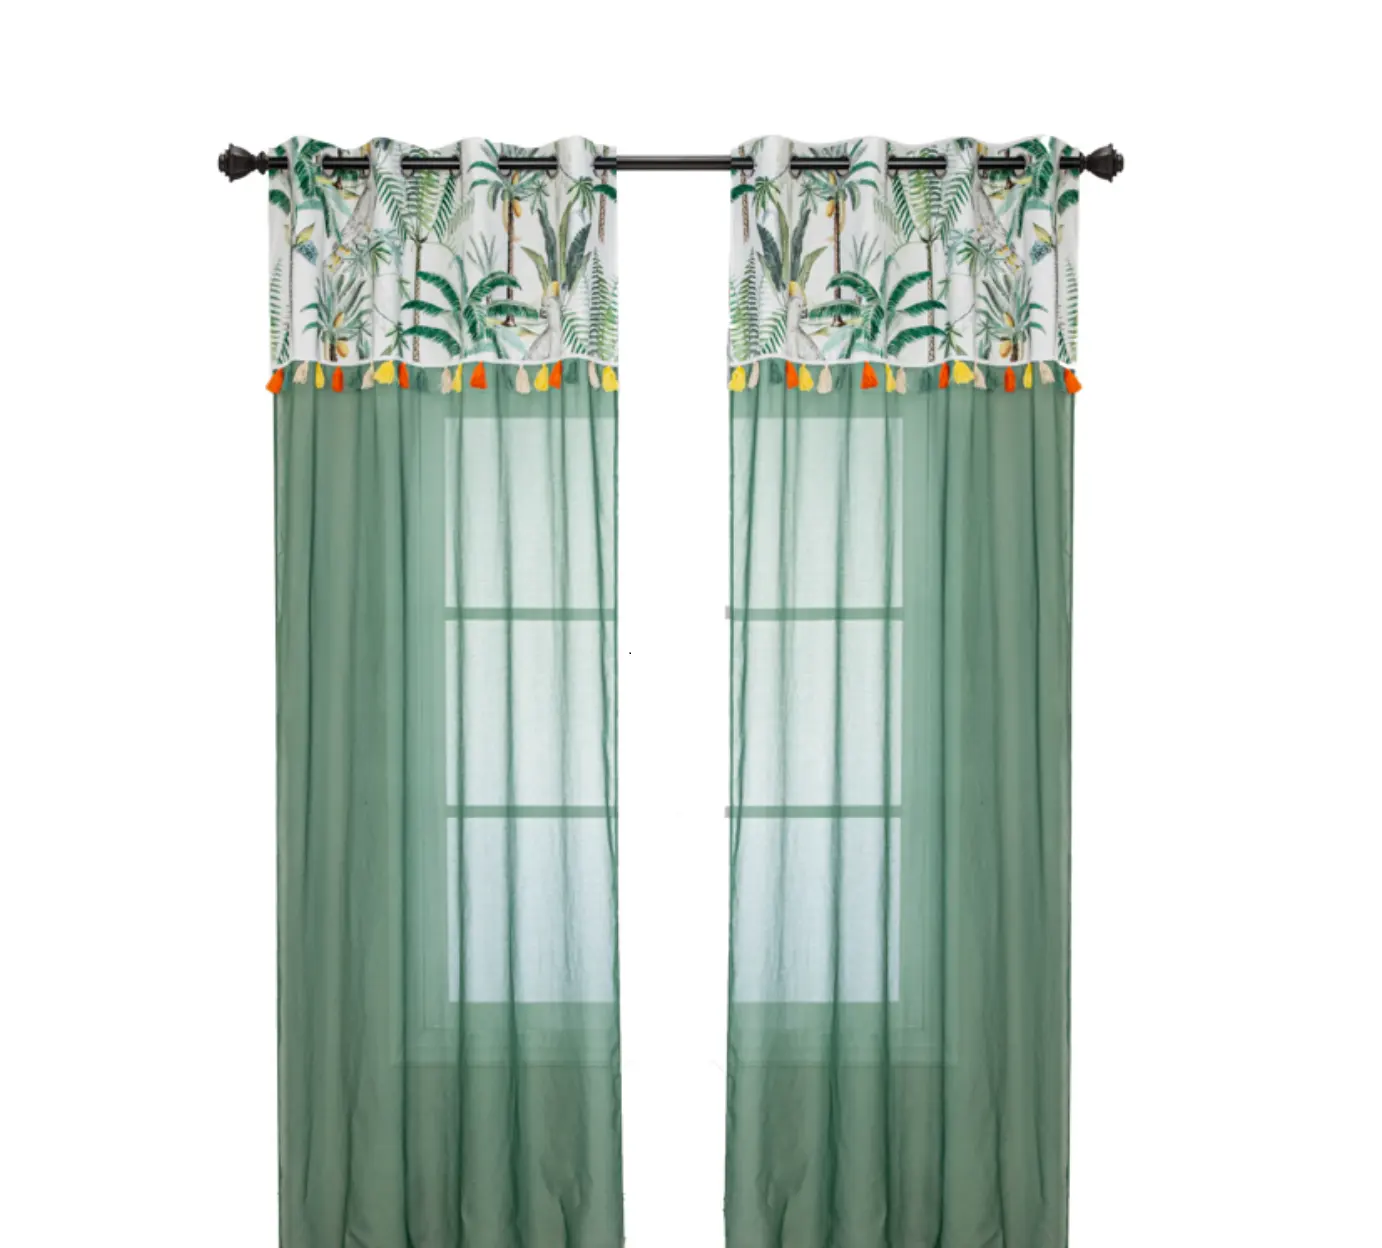 2023 New Arrival Stitching Green Grommet Curtains, Oases Series Sheer Curtain, Bedroom Decorative Window Cortinas